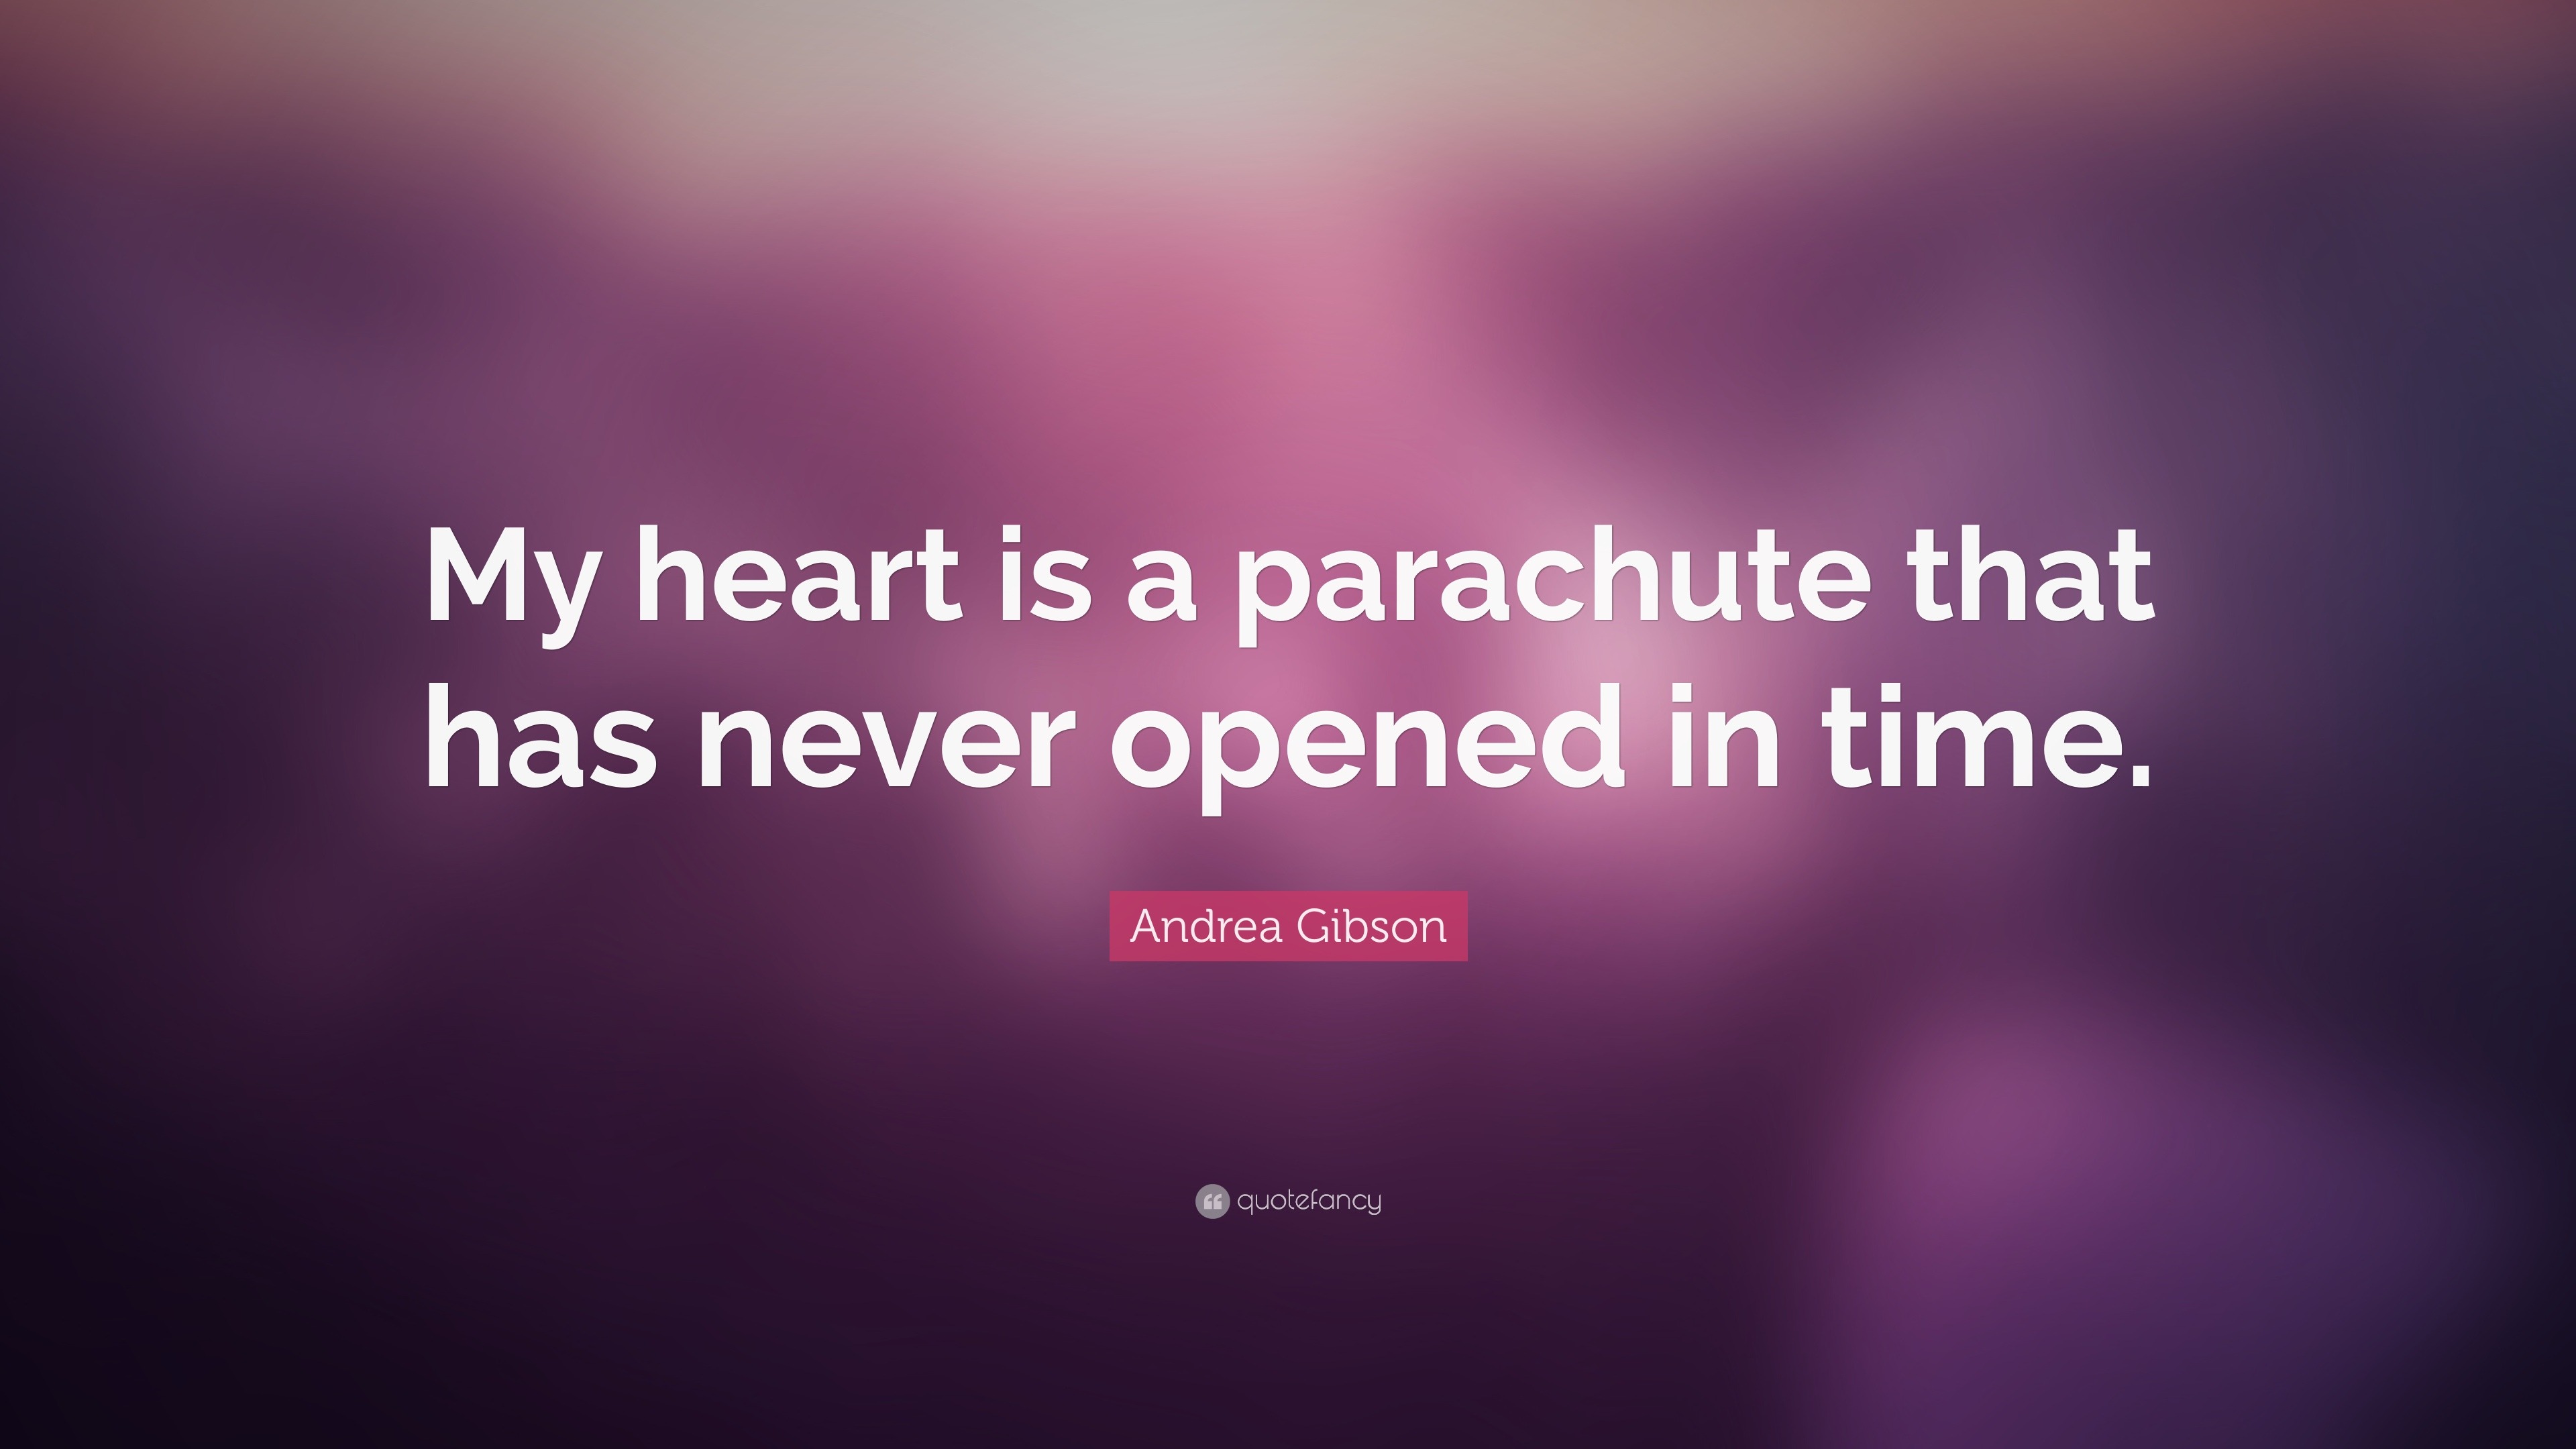 Andrea Gibson Quote: “My heart is a parachute that has never opened in  time.”